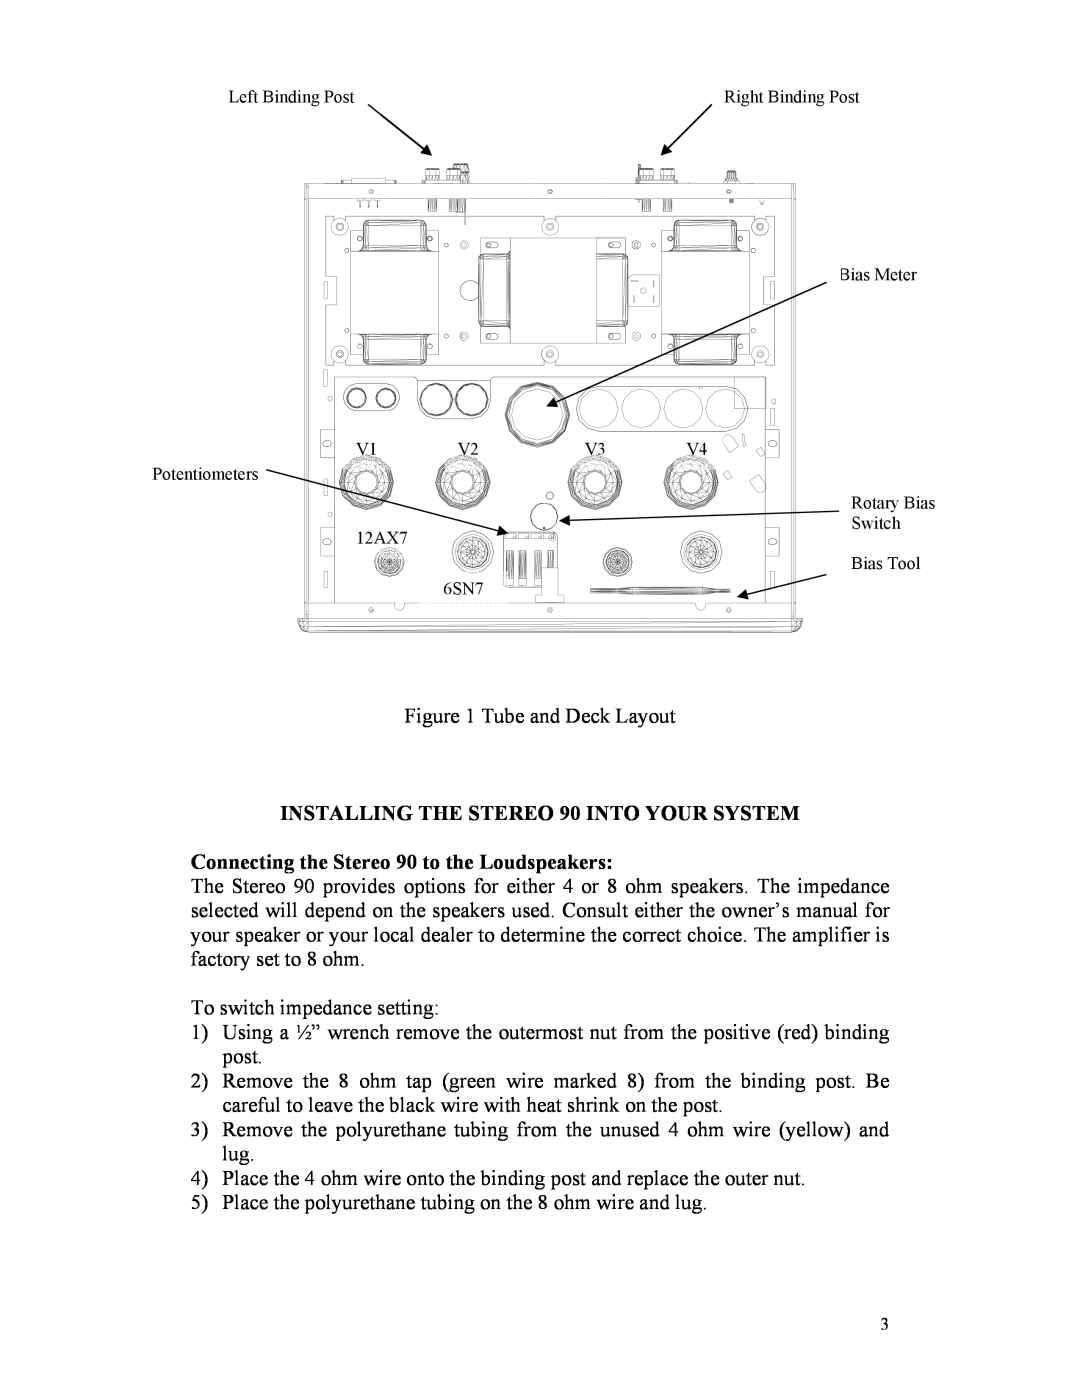 Rogue Audio owner manual INSTALLING THE STEREO 90 INTO YOUR SYSTEM, Connecting the Stereo 90 to the Loudspeakers 